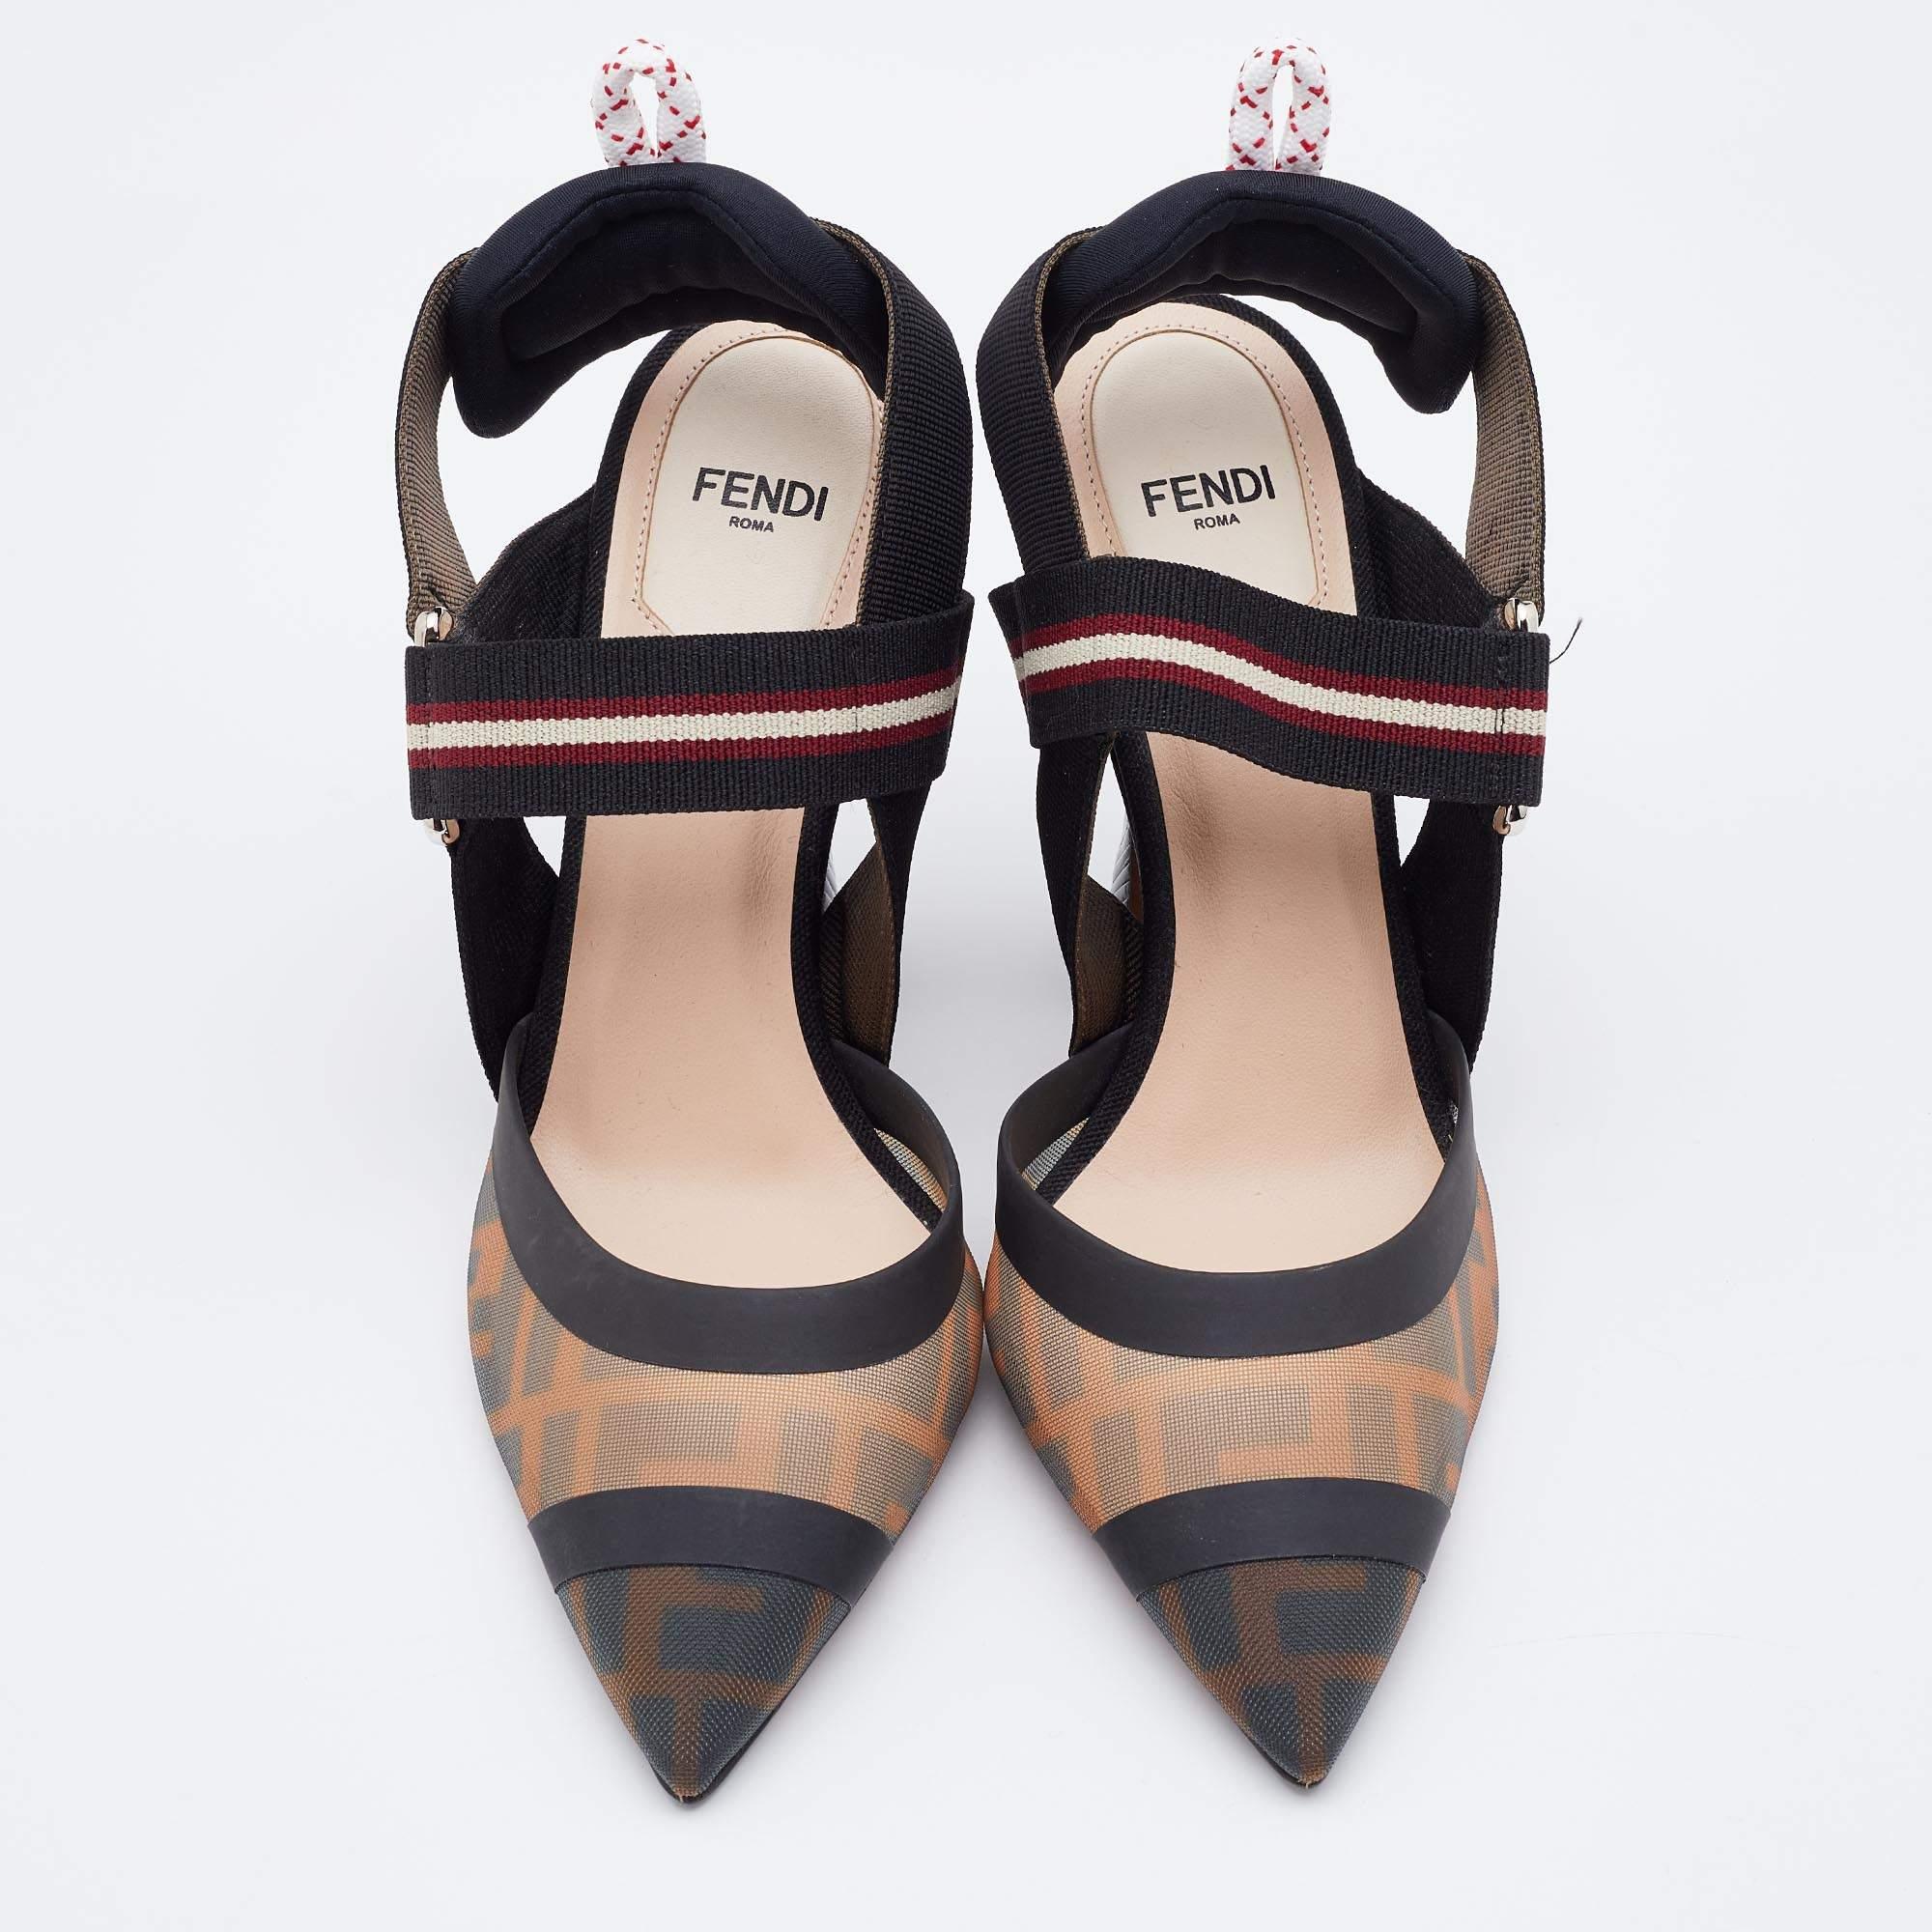 Wonderfully-crafted shoes added with notable elements to fit well and pair perfectly with all your plans. Make these Fendi Colibri pumps yours today!

